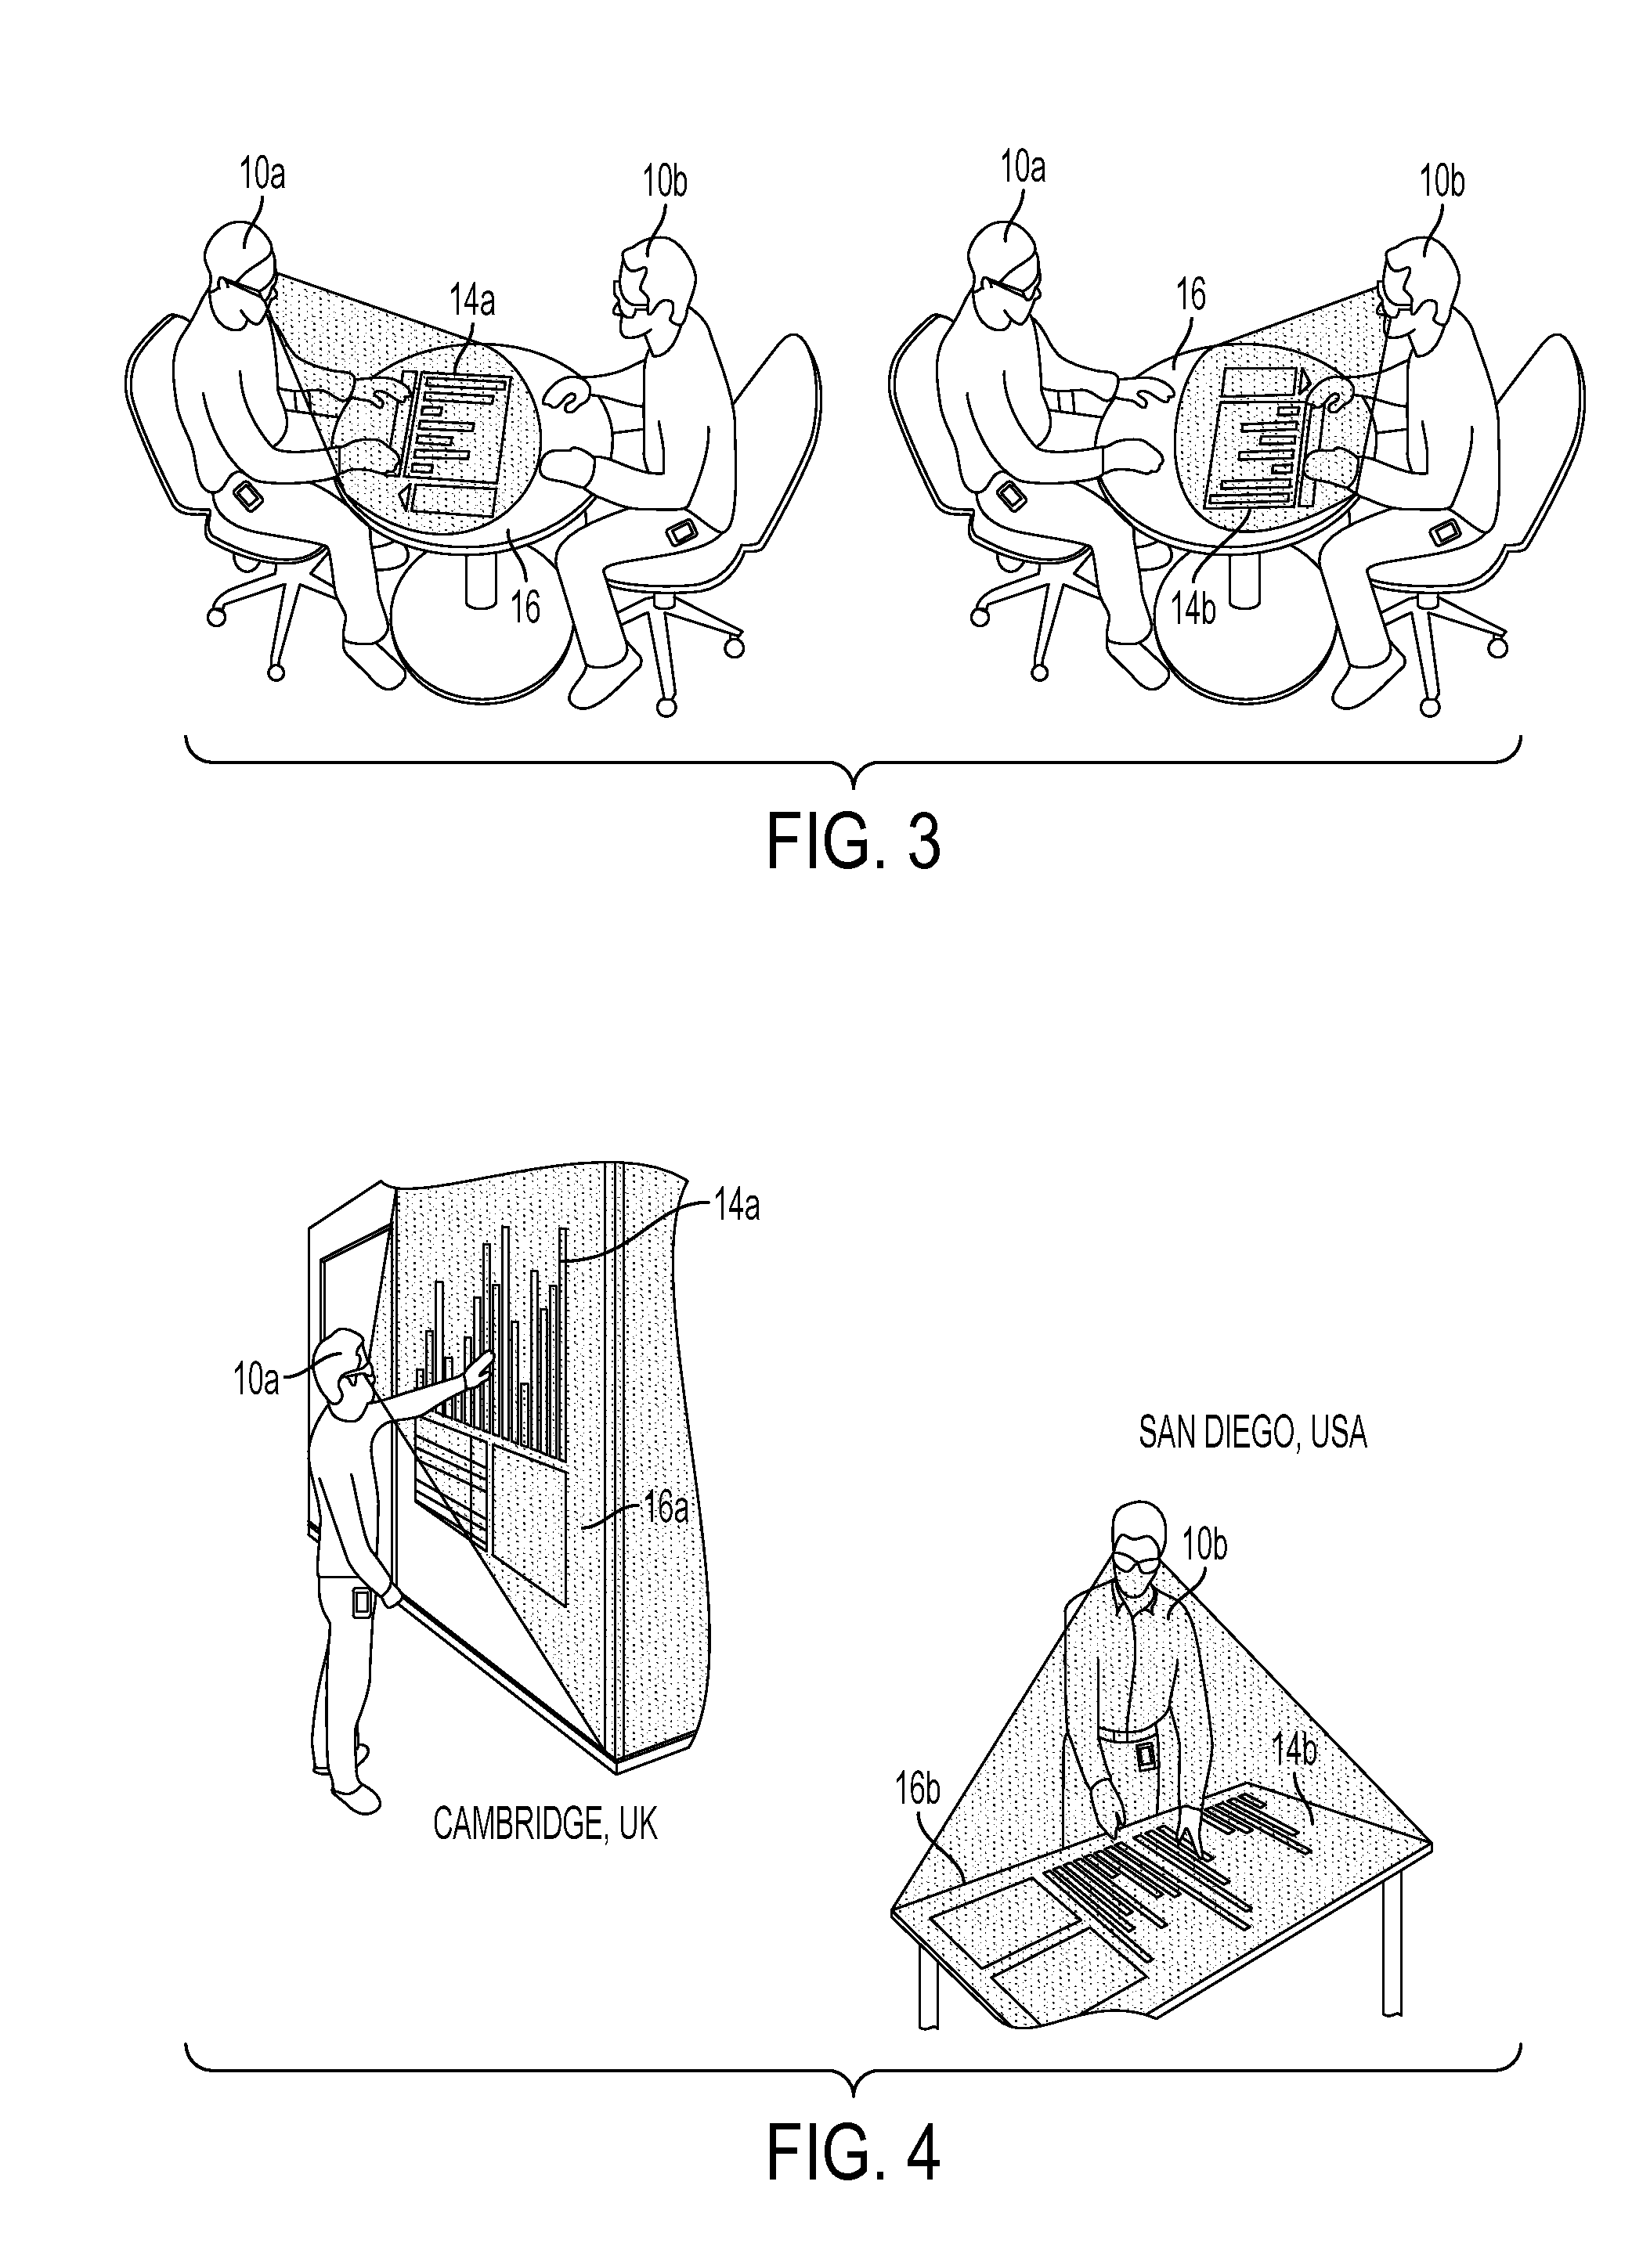 System for the rendering of shared digital interfaces relative to each user's point of view